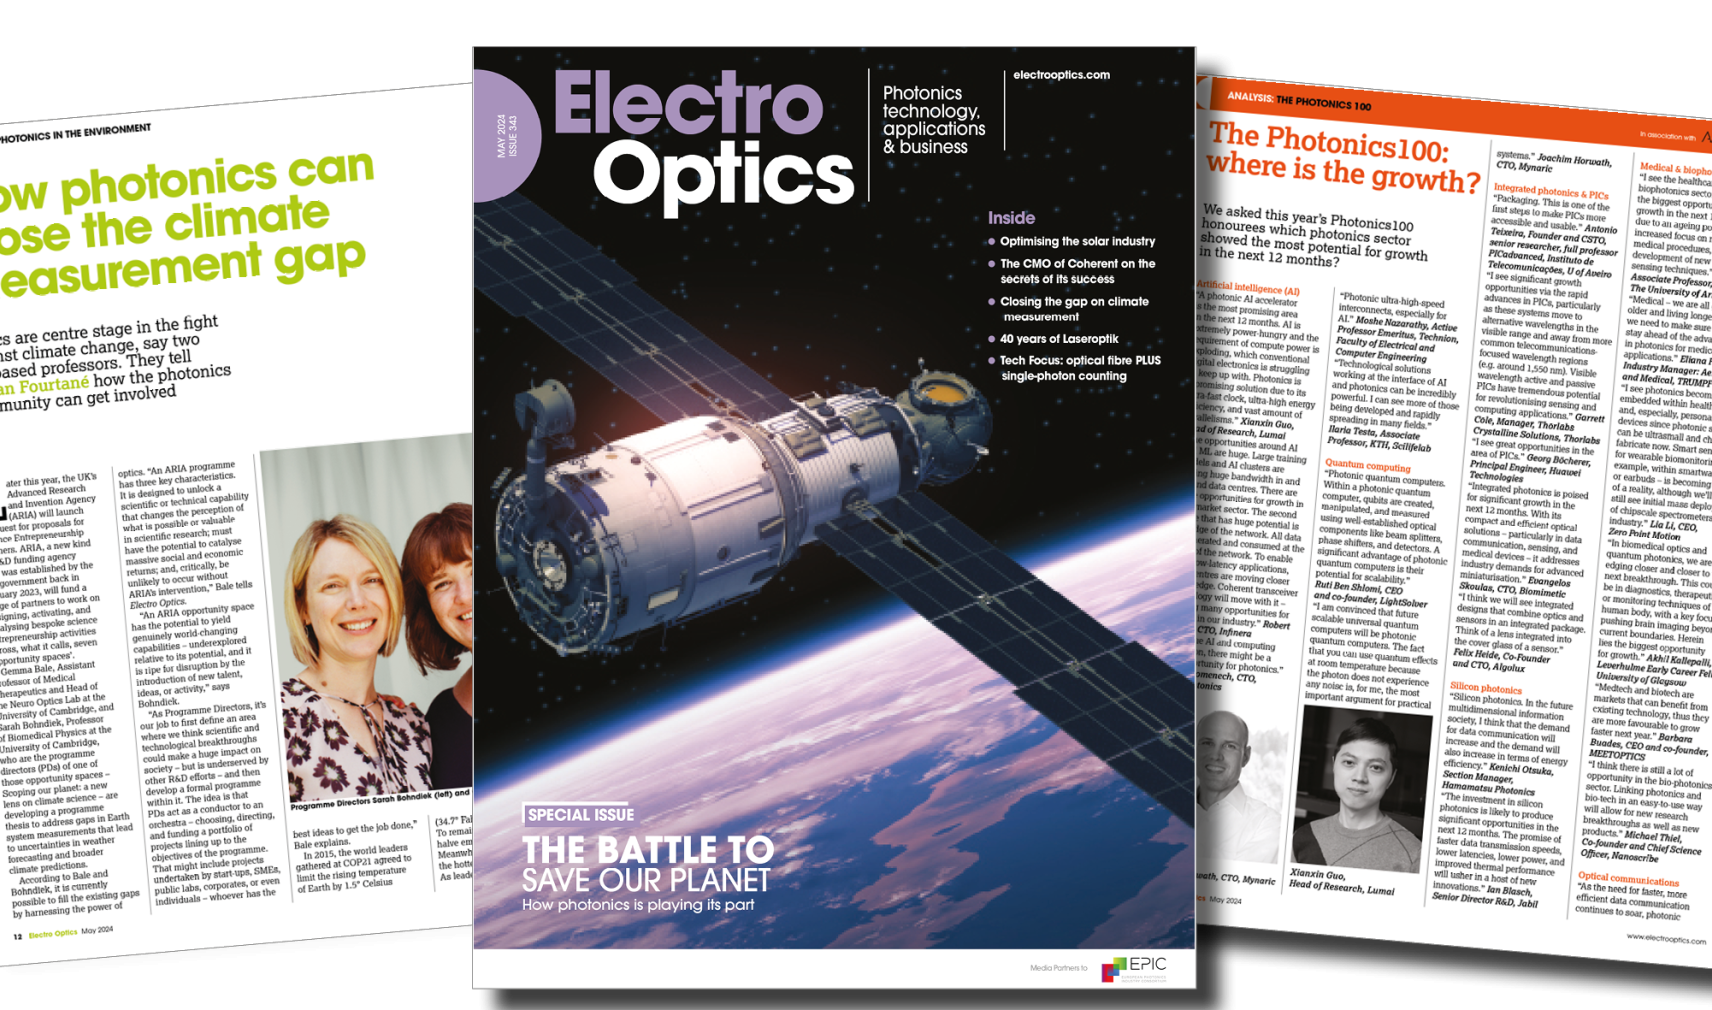 Introducing the May issue of Electro Optics